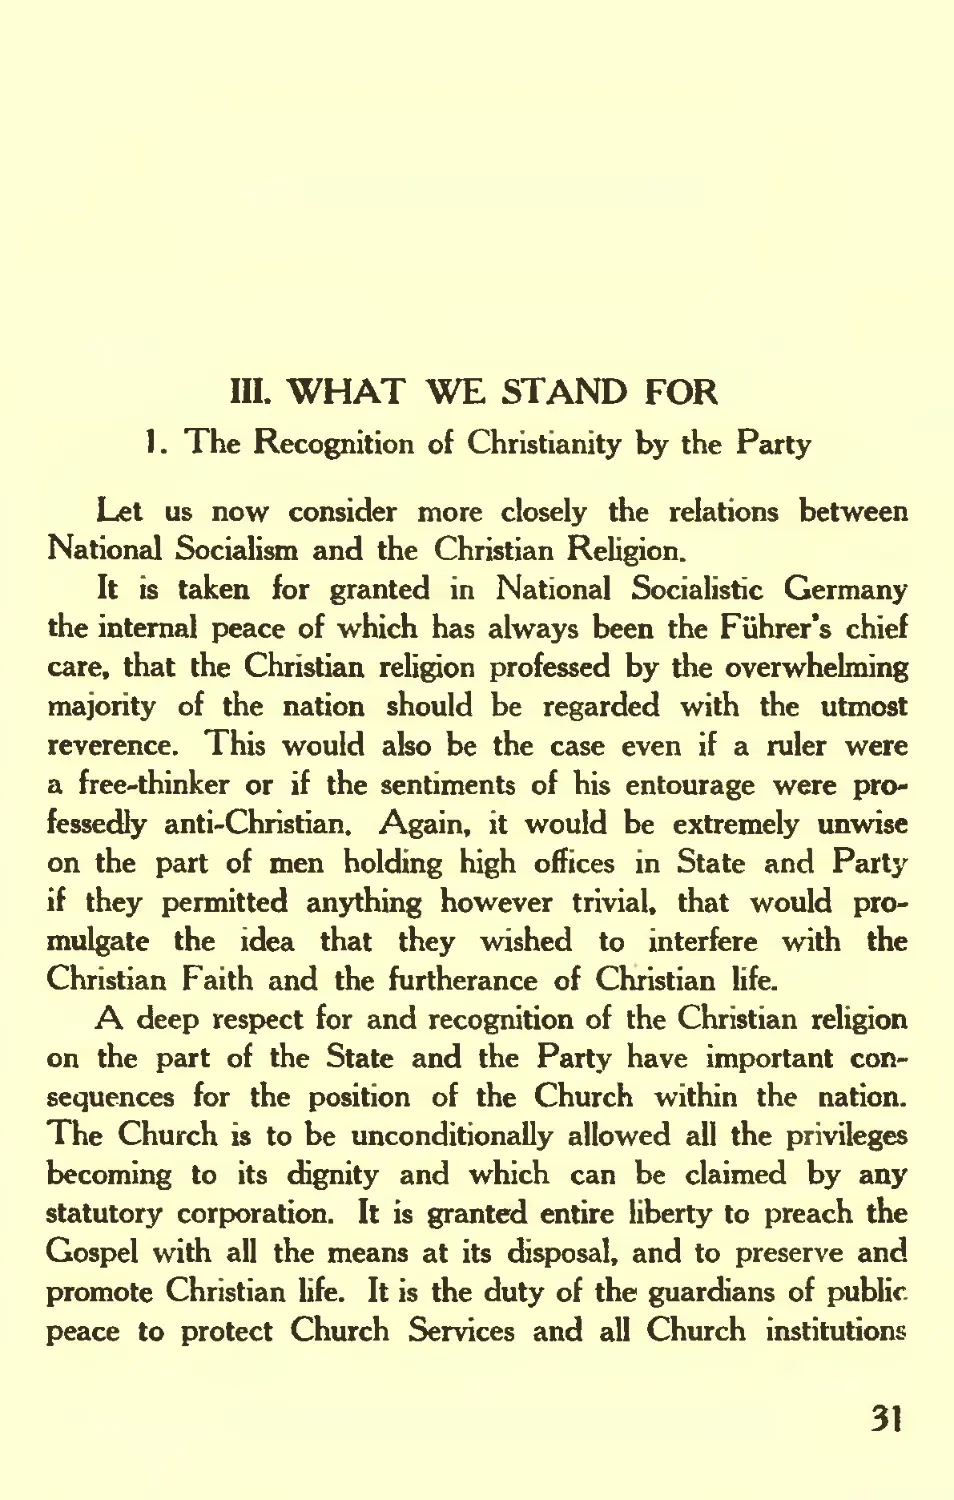 III. WHAT WE STAND FOR
1. The Recognition of Christianity by the Party